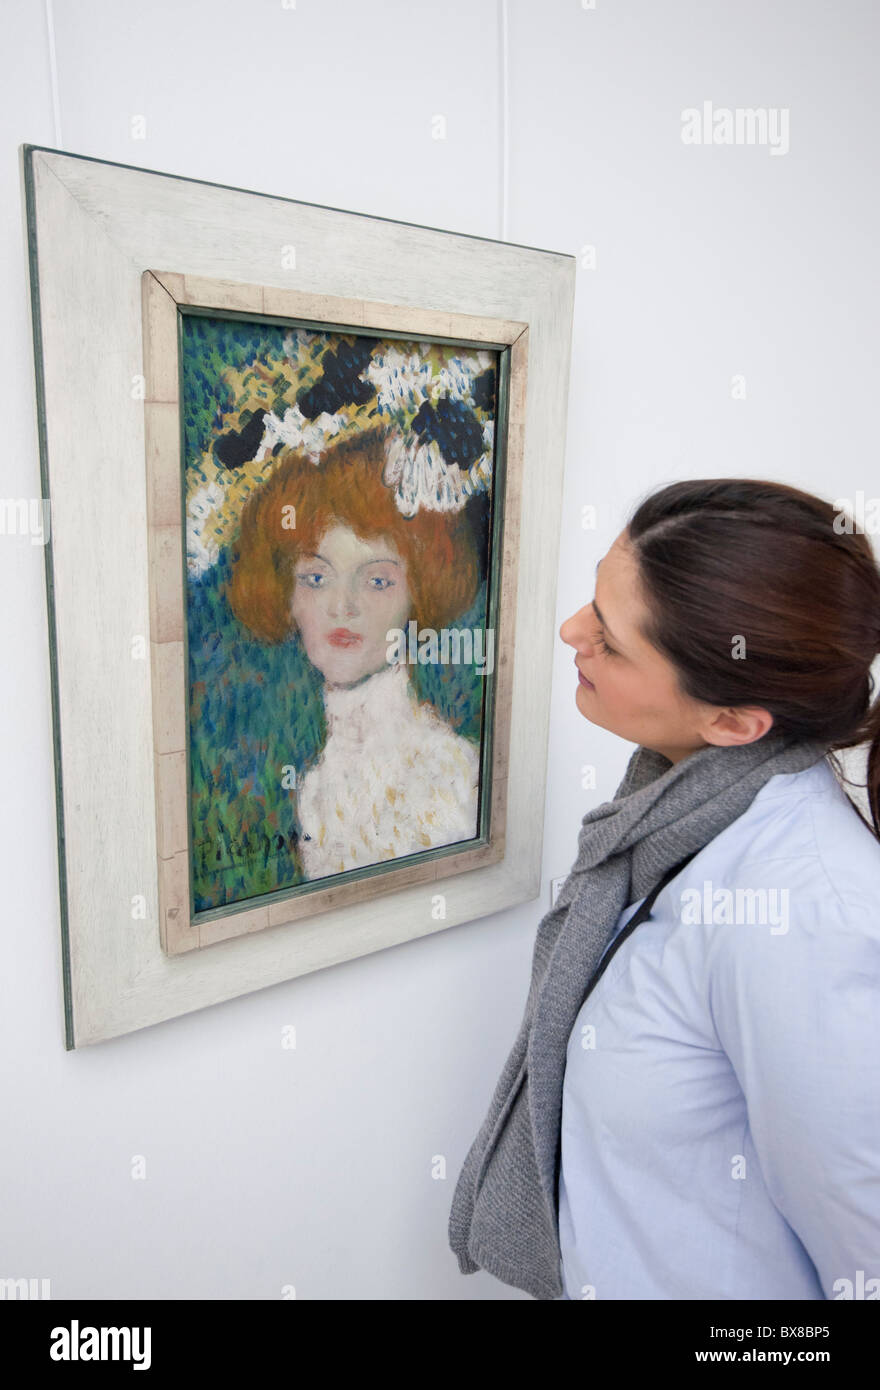 Woman looking at painting Portrait of a Woman (the Madrillenian) by Pablo Picasso at Kroller-Muller Museum in The Netherlands Stock Photo